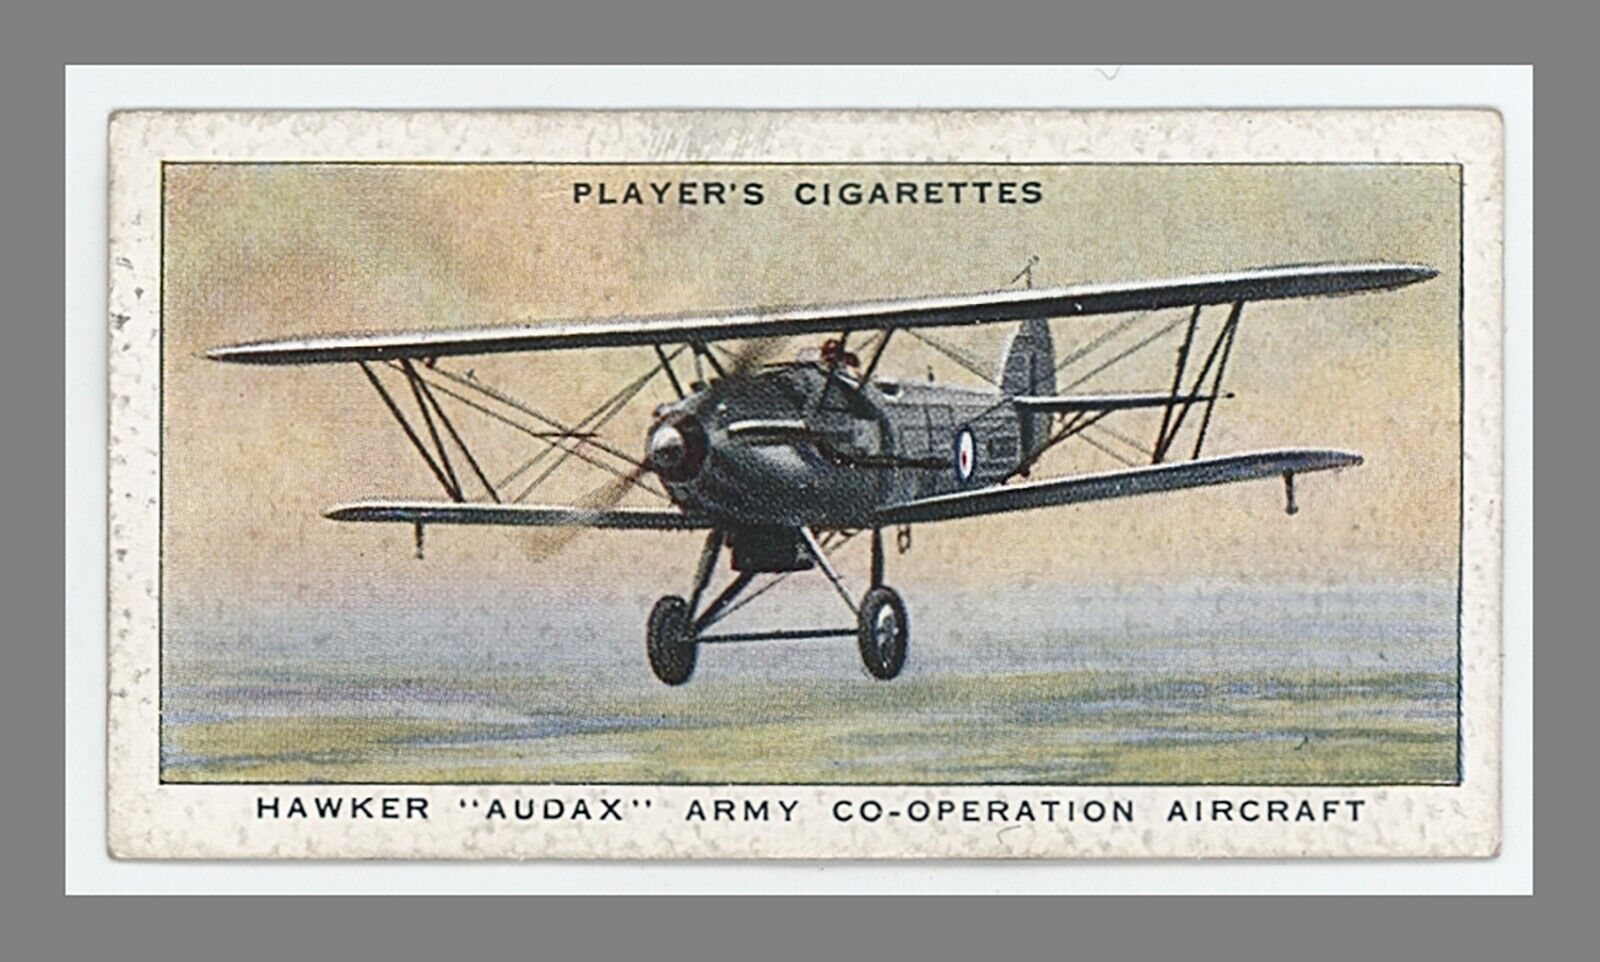 Players Cigarettes Royal Air Force Audax Army Coop Aircraft John Player Sons